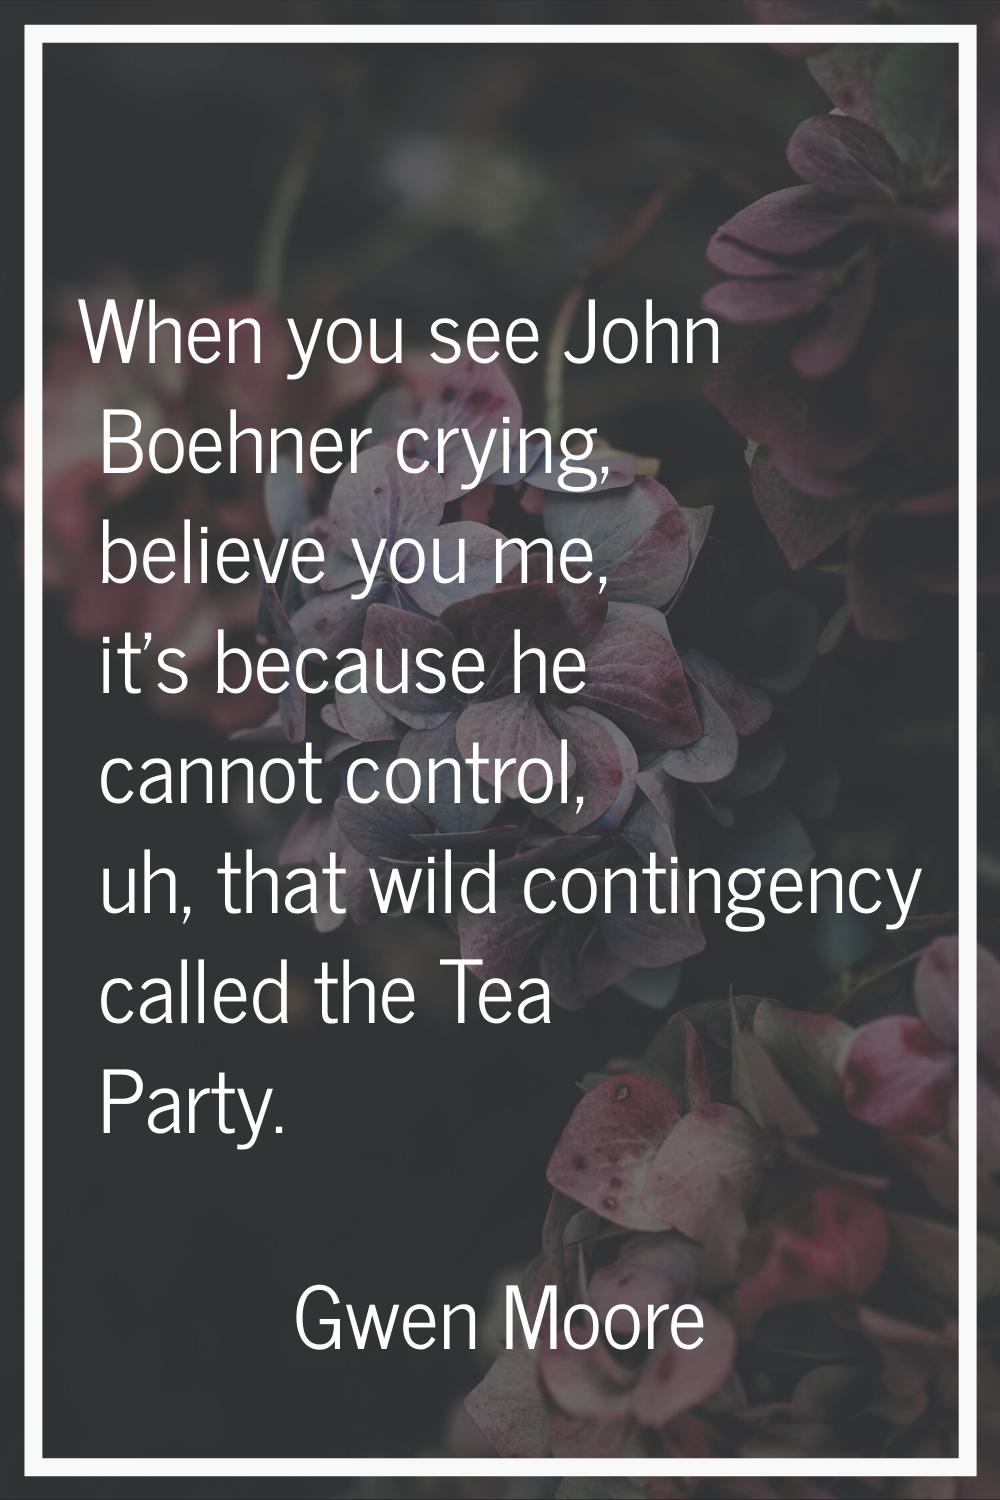 When you see John Boehner crying, believe you me, it's because he cannot control, uh, that wild con